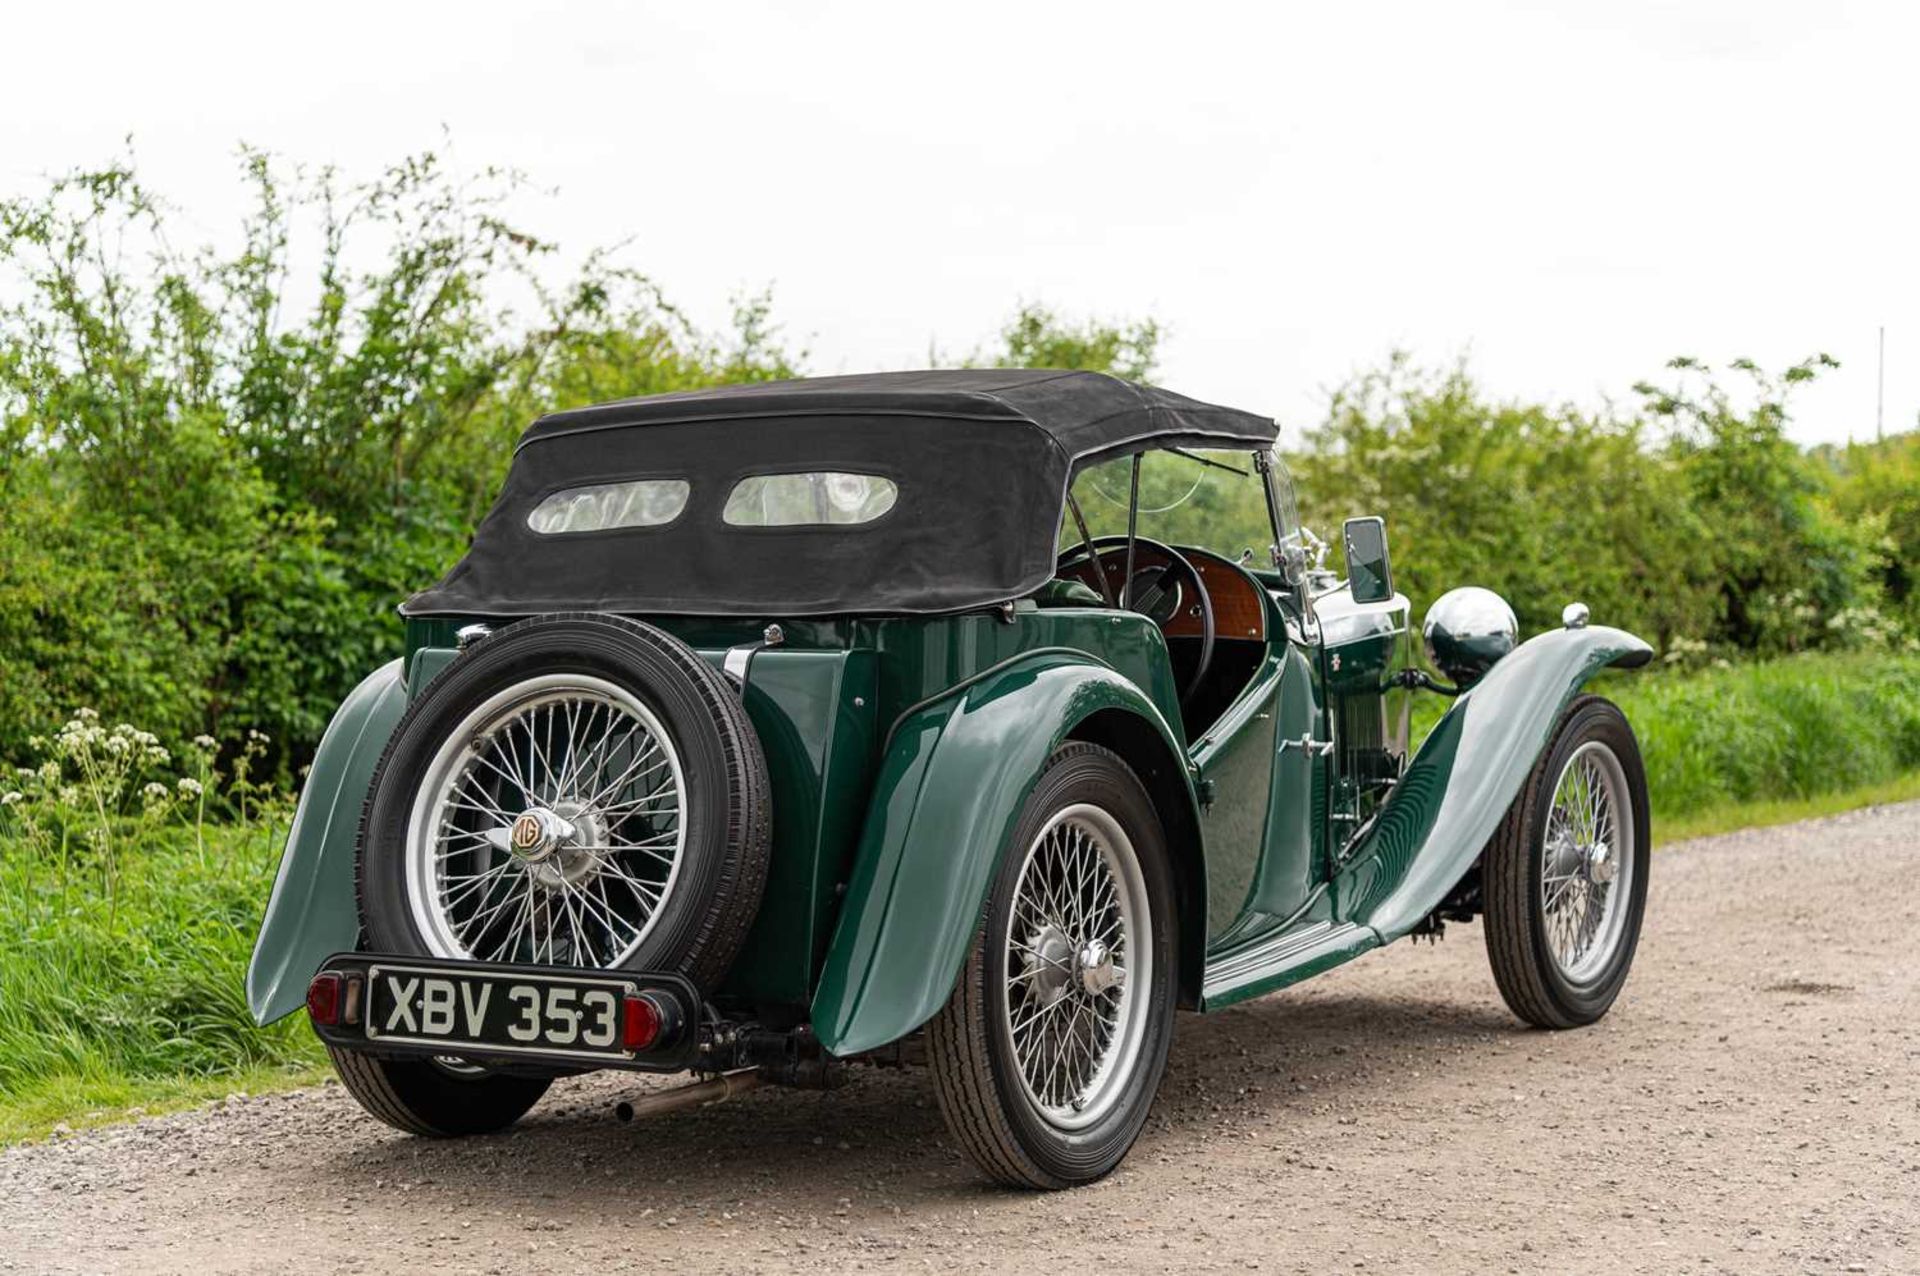 1947 MG TC Midget  Fully restored, right-hand-drive UK home market example - Image 14 of 76